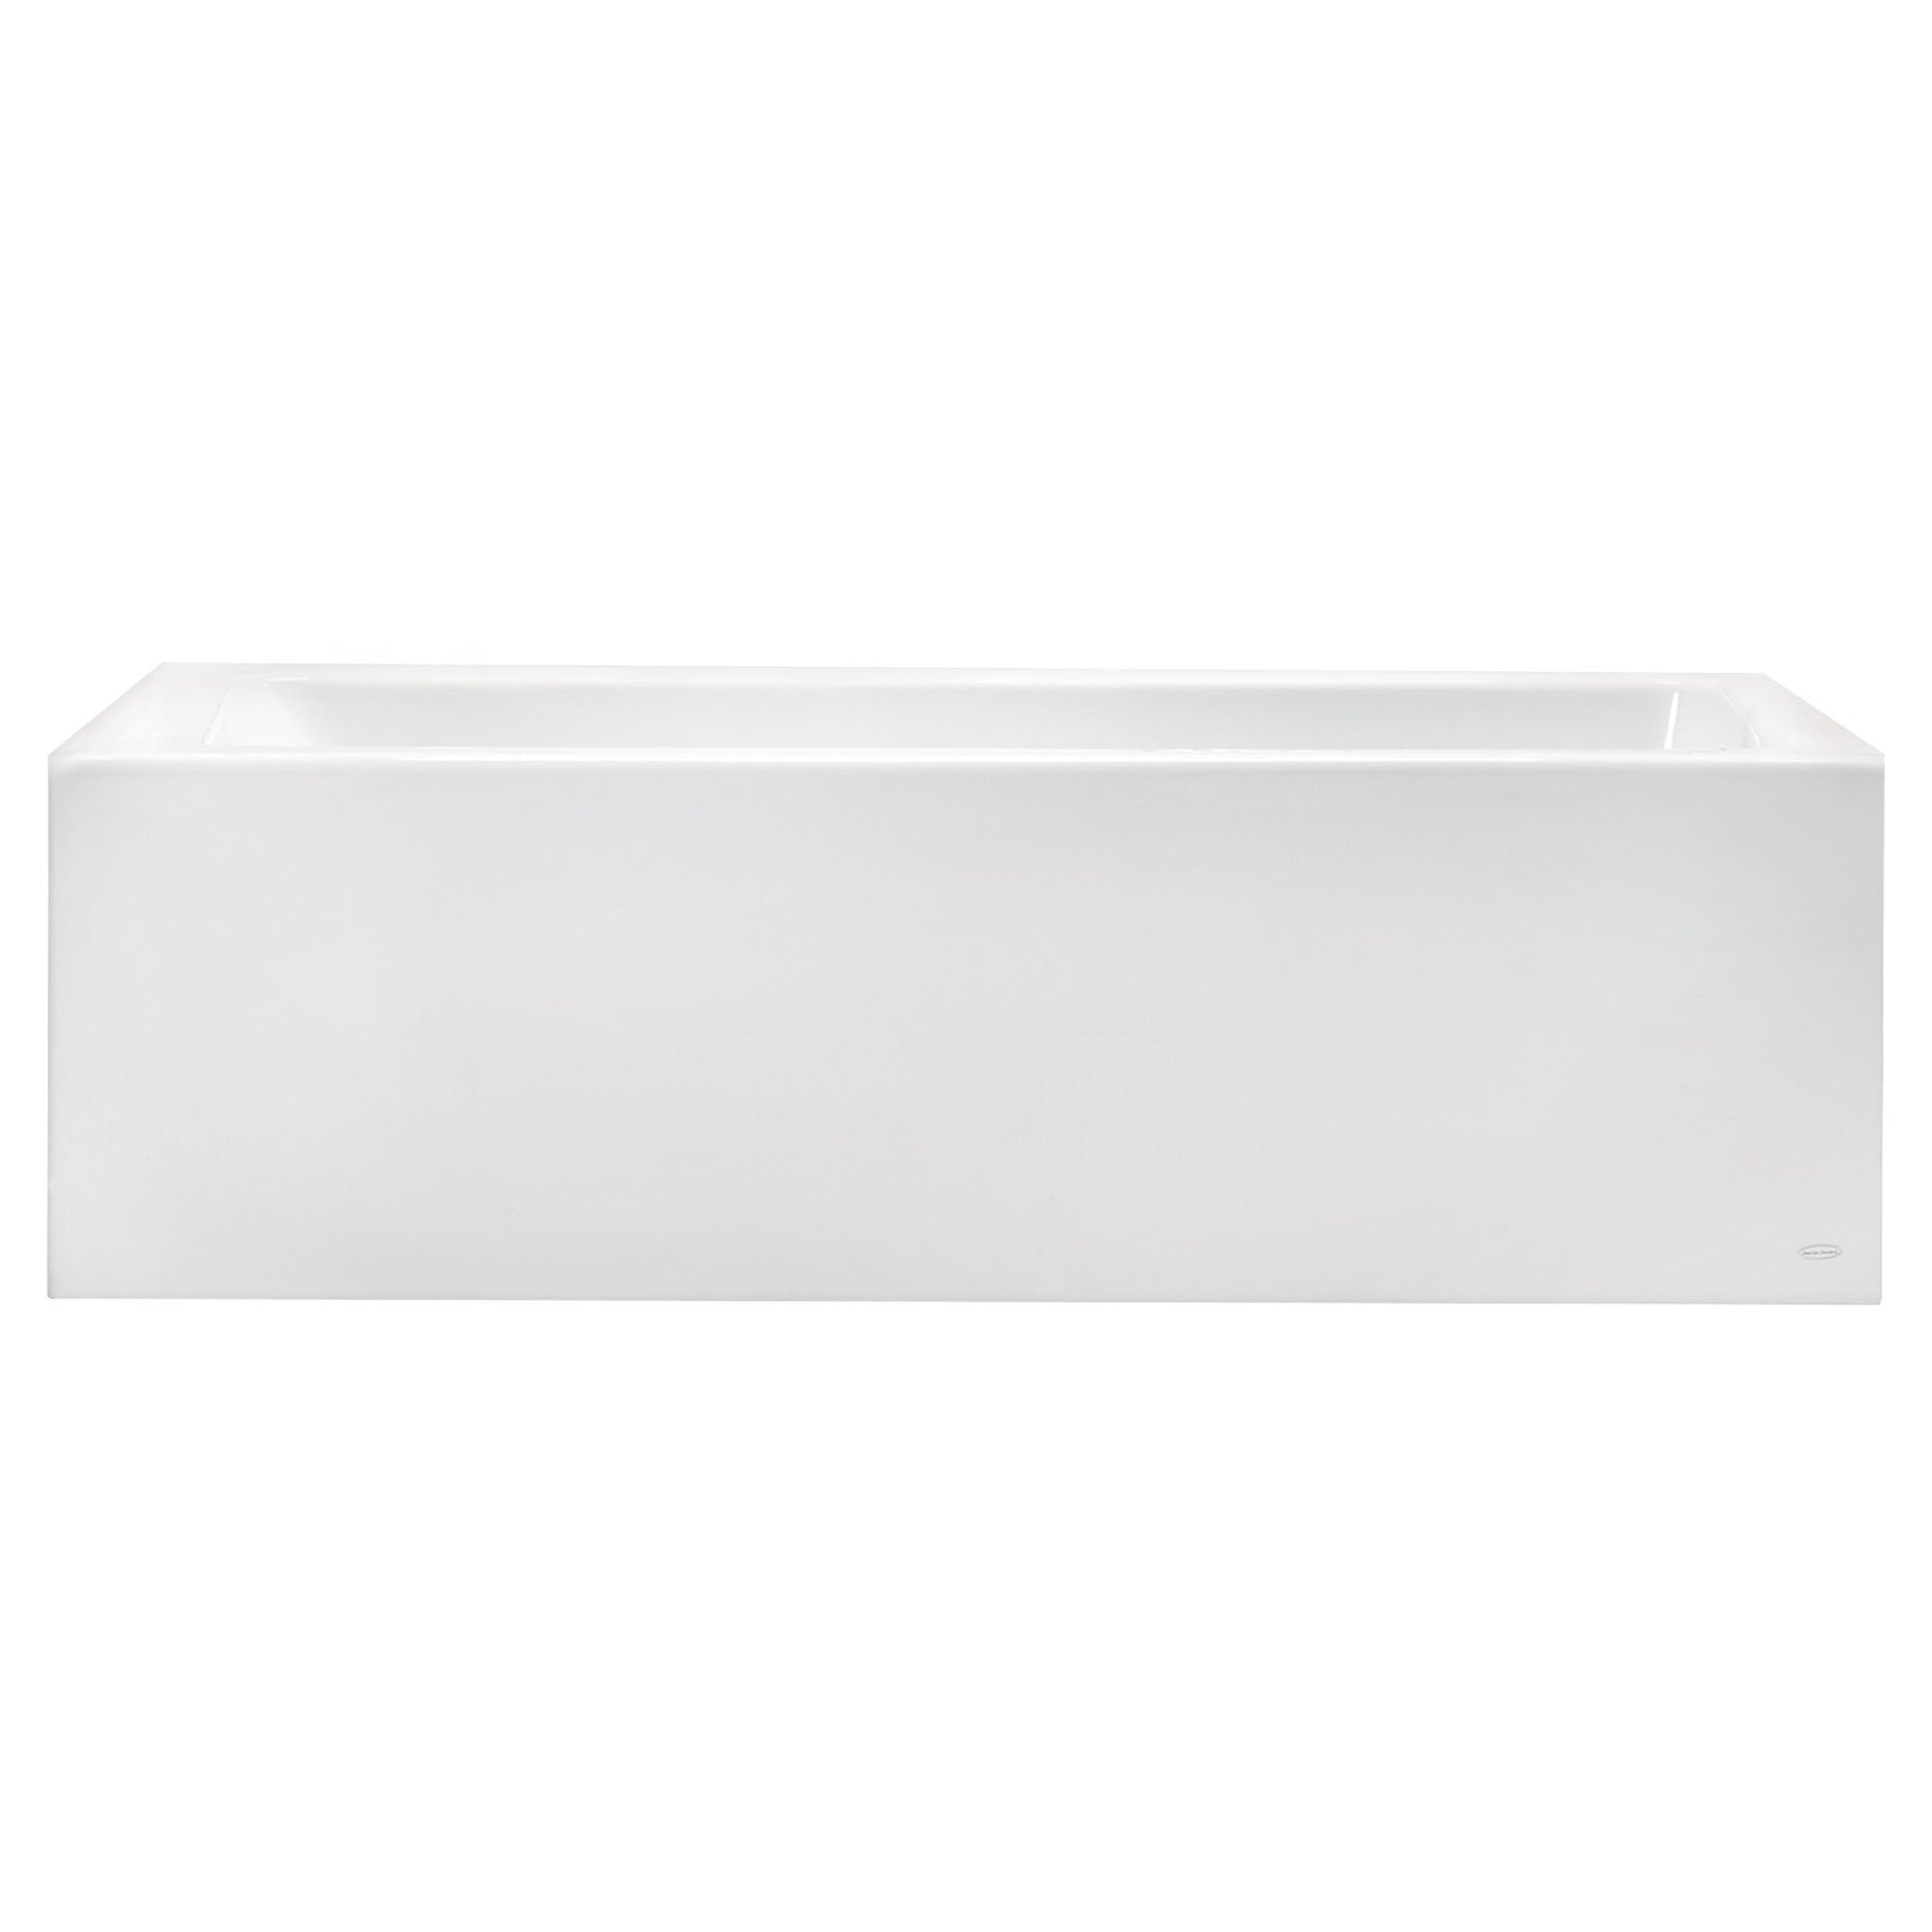 AMERICAN-STANDARD 2574102.020, Studio 60 x 32-Inch Integral Apron Bathtub Above Floor Rough With Right-Hand Outlet in White